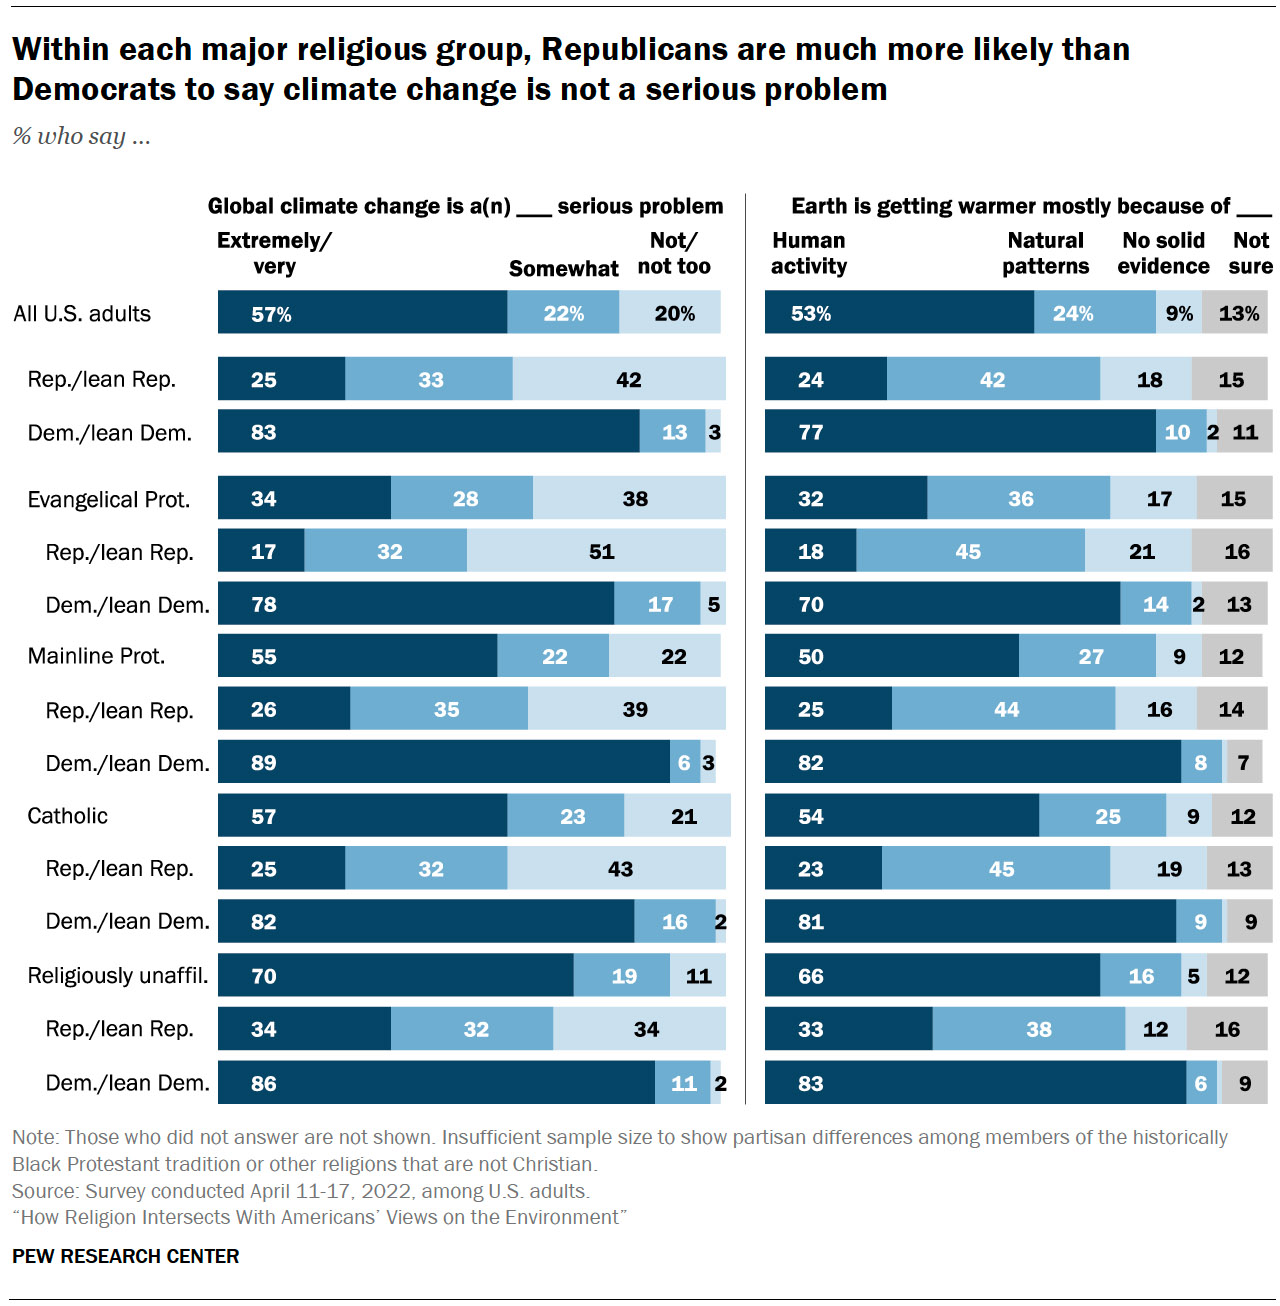 "Within each major religious group, Republicans are much more likely than Democrats to say climate change is not a serious problem" Graphic courtesy of Pew Research Center